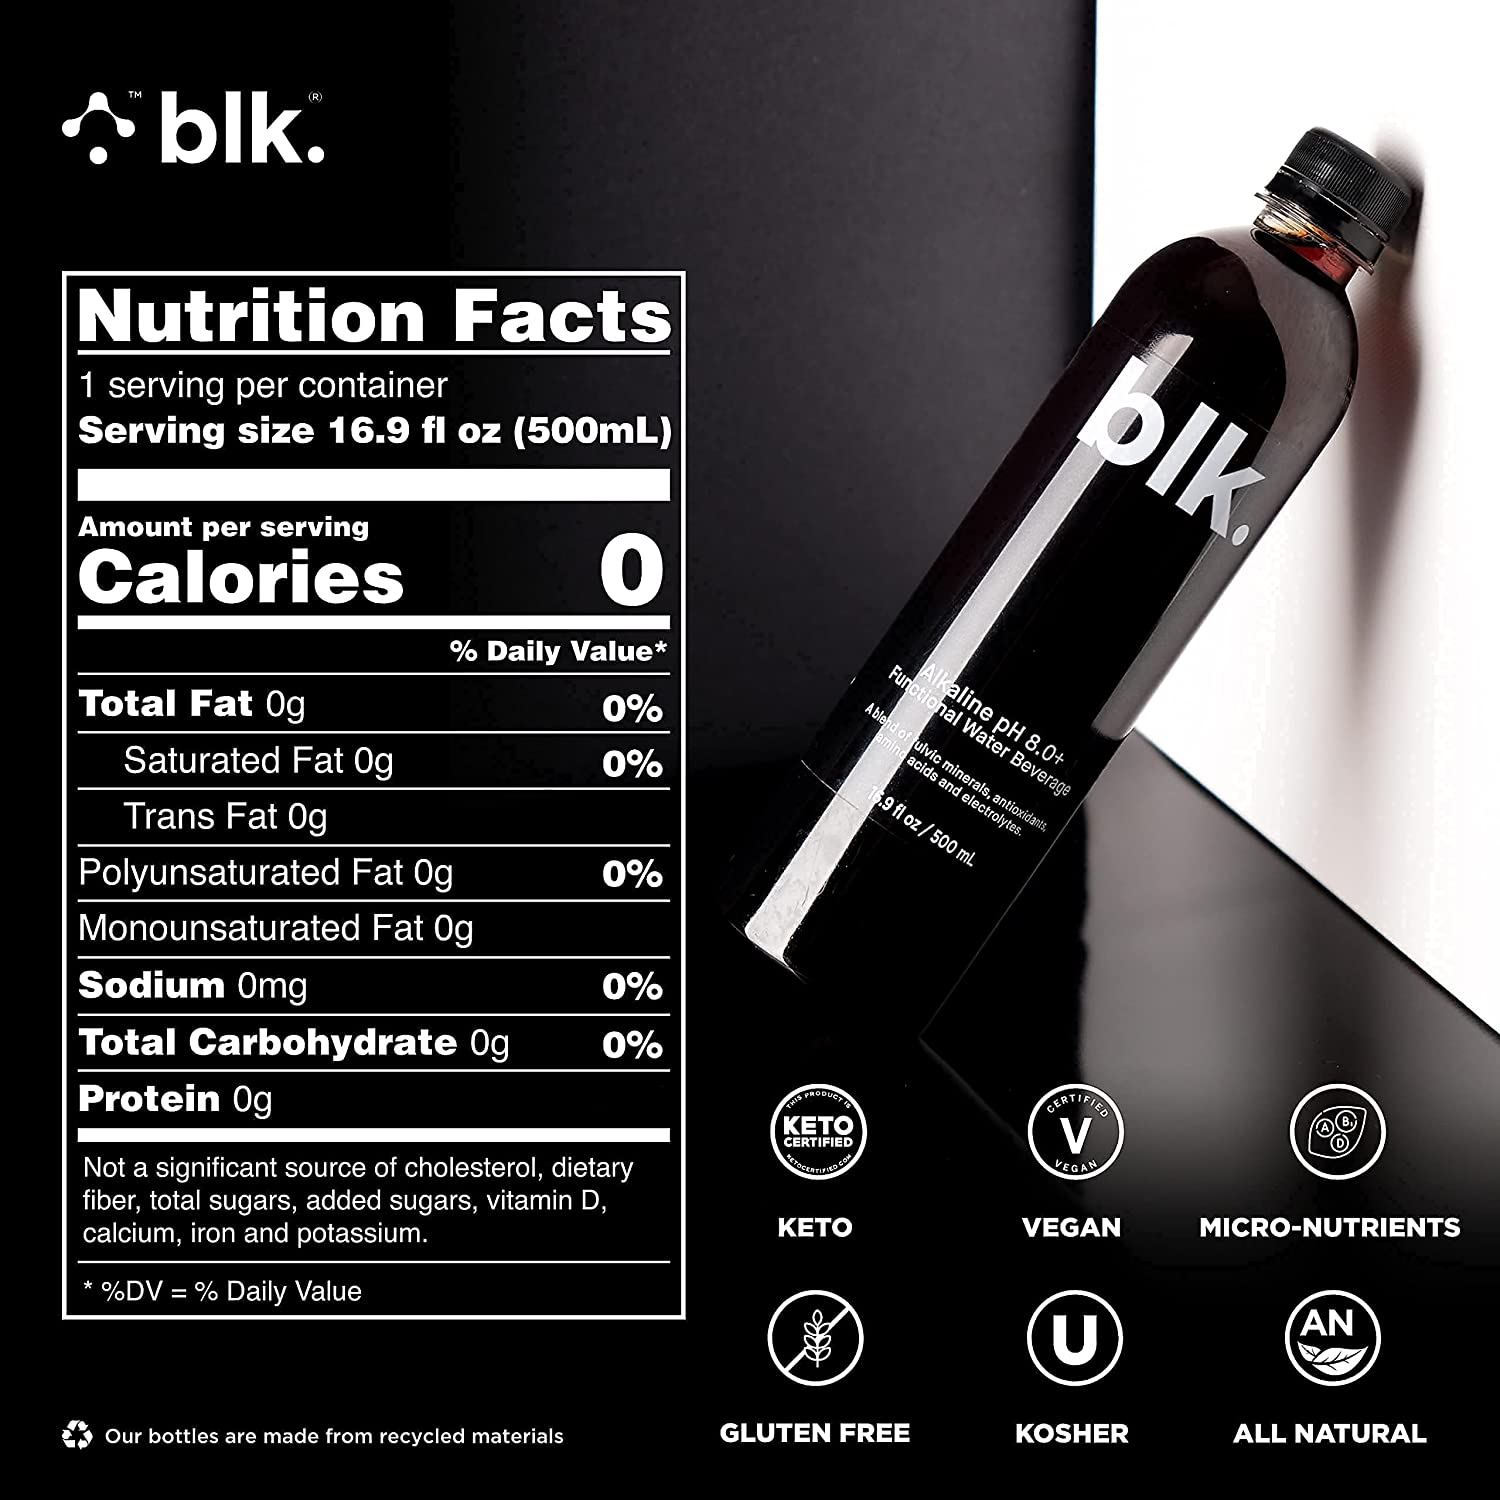 blk. Natural Mineral Alkaline Water, ph8+ Fulvic & Humic Acid Extract,  Trace Minerals, Electrolytes, Hydrate with Essential Minerals, 33.8 oz, 1L,  12